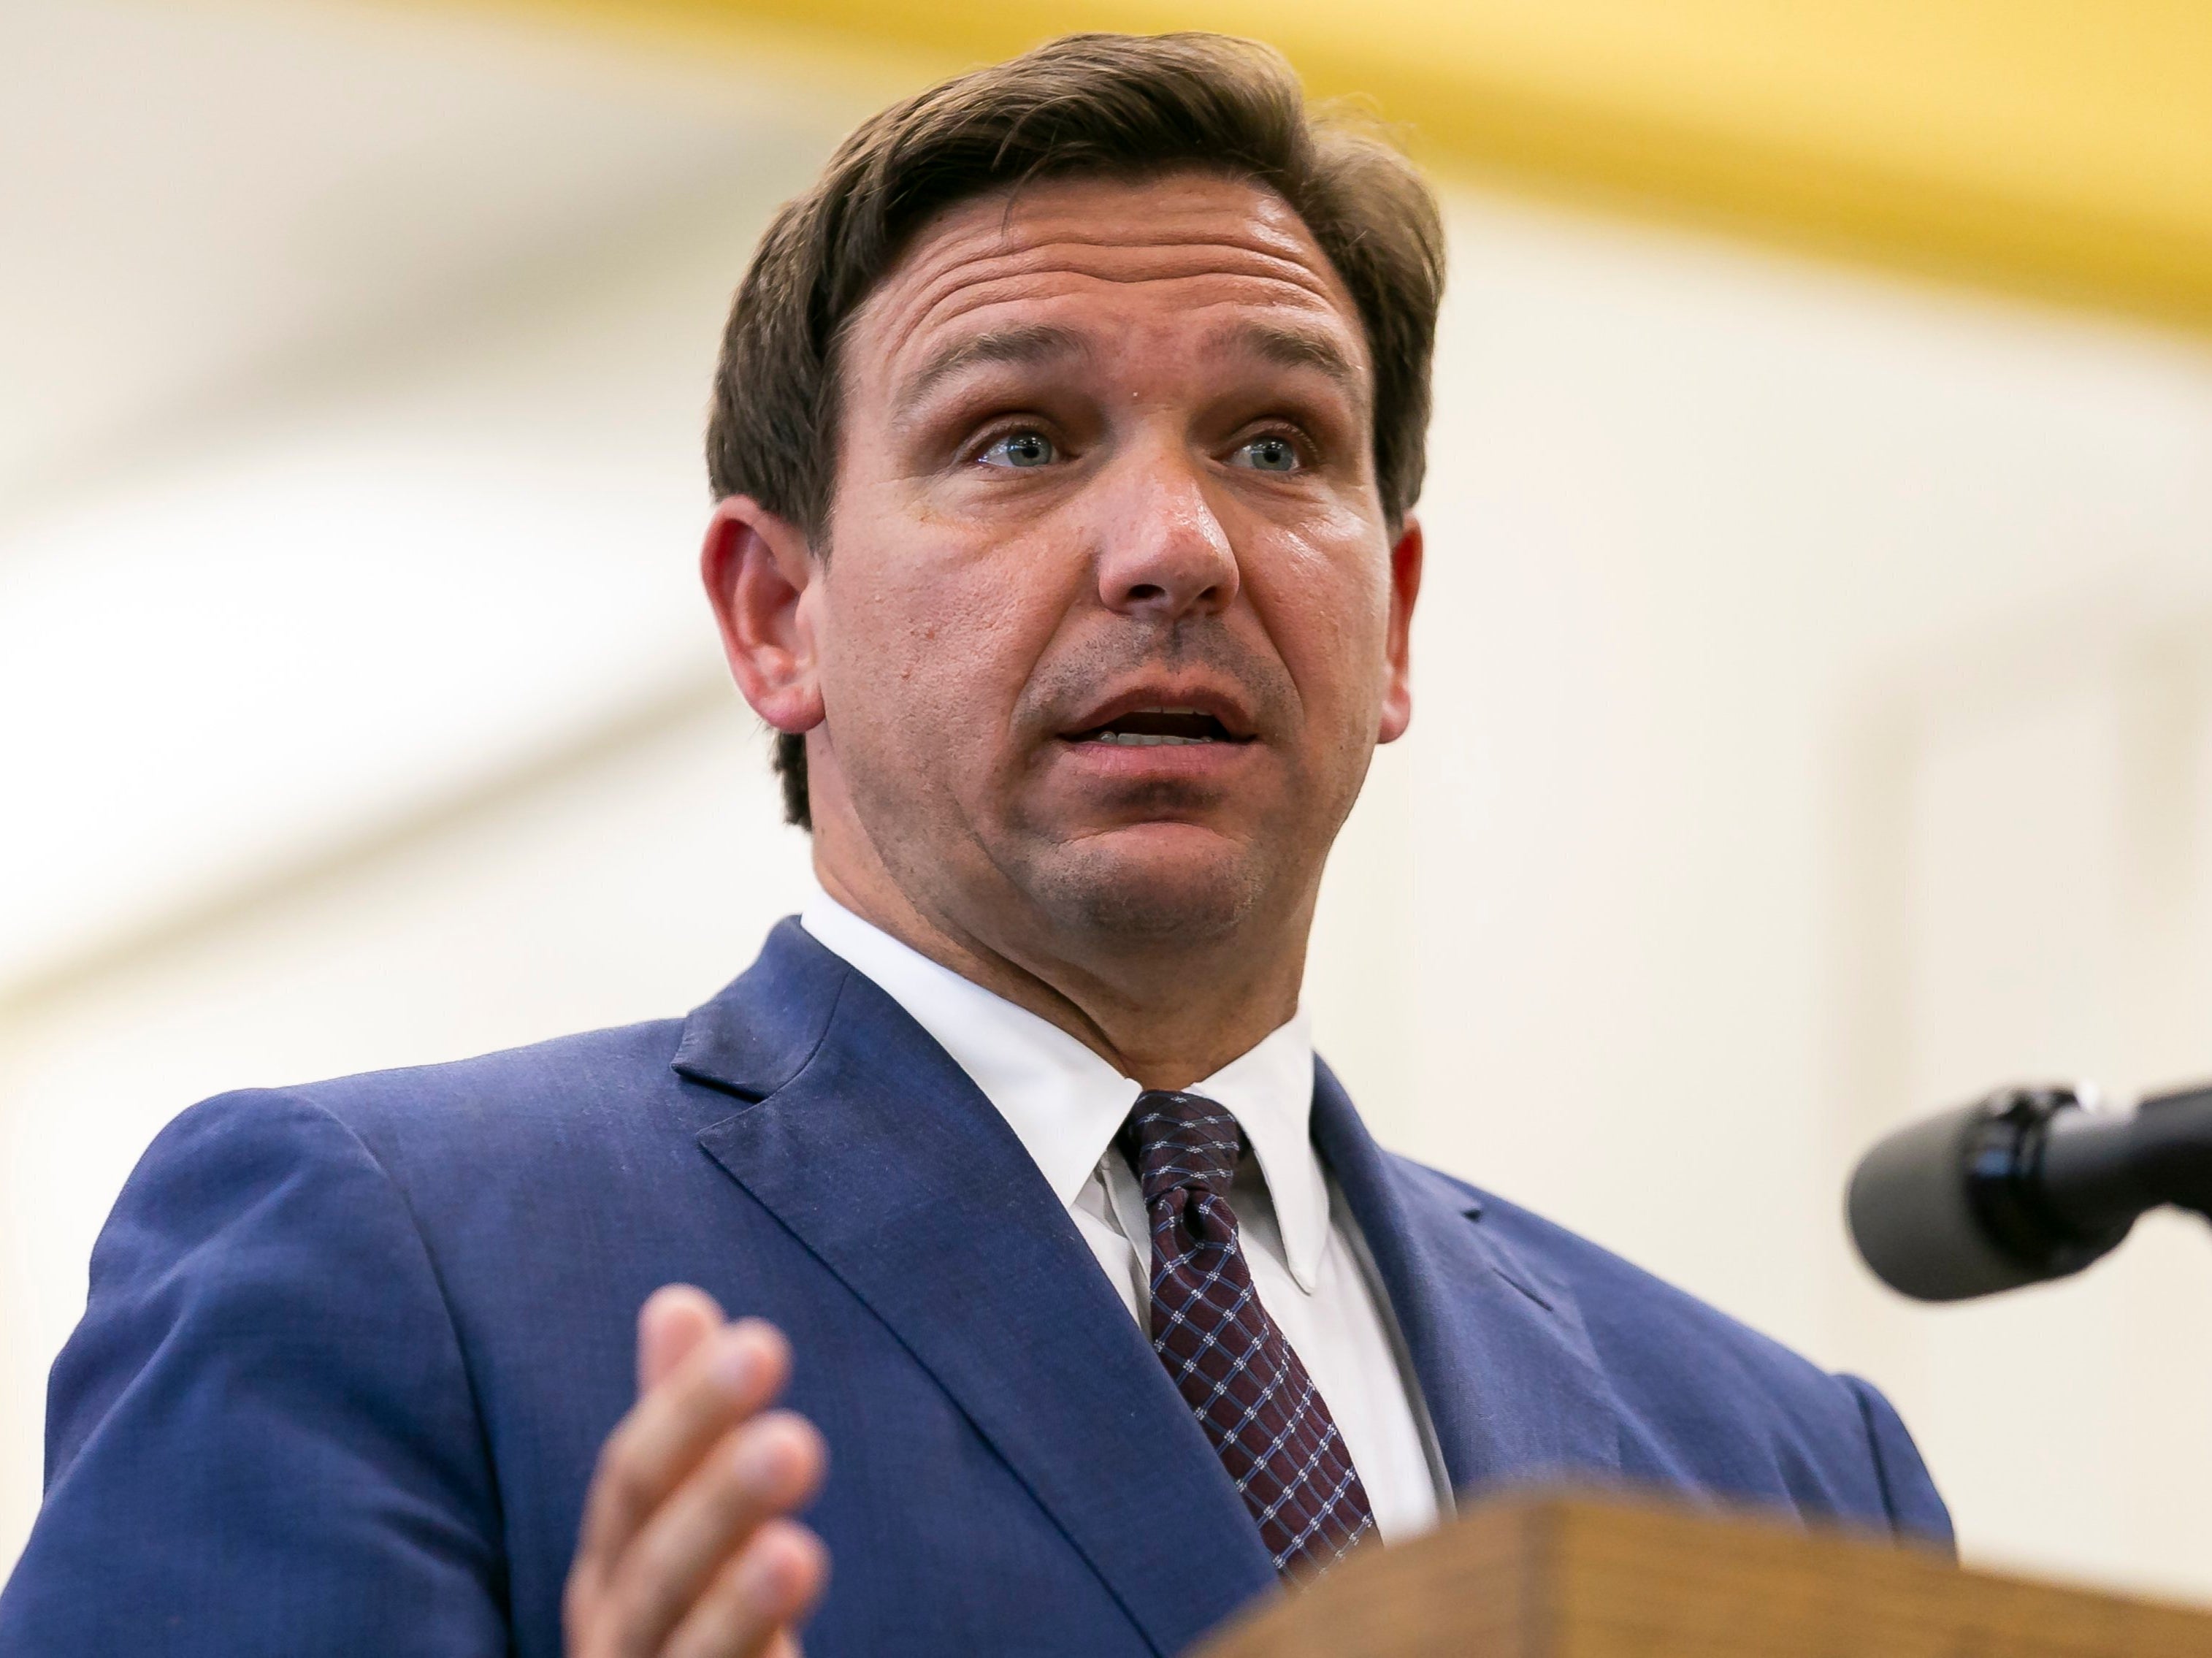 Florida Governor Ron DeSantis speaks during a news conference at West Miami Middle School in Miami